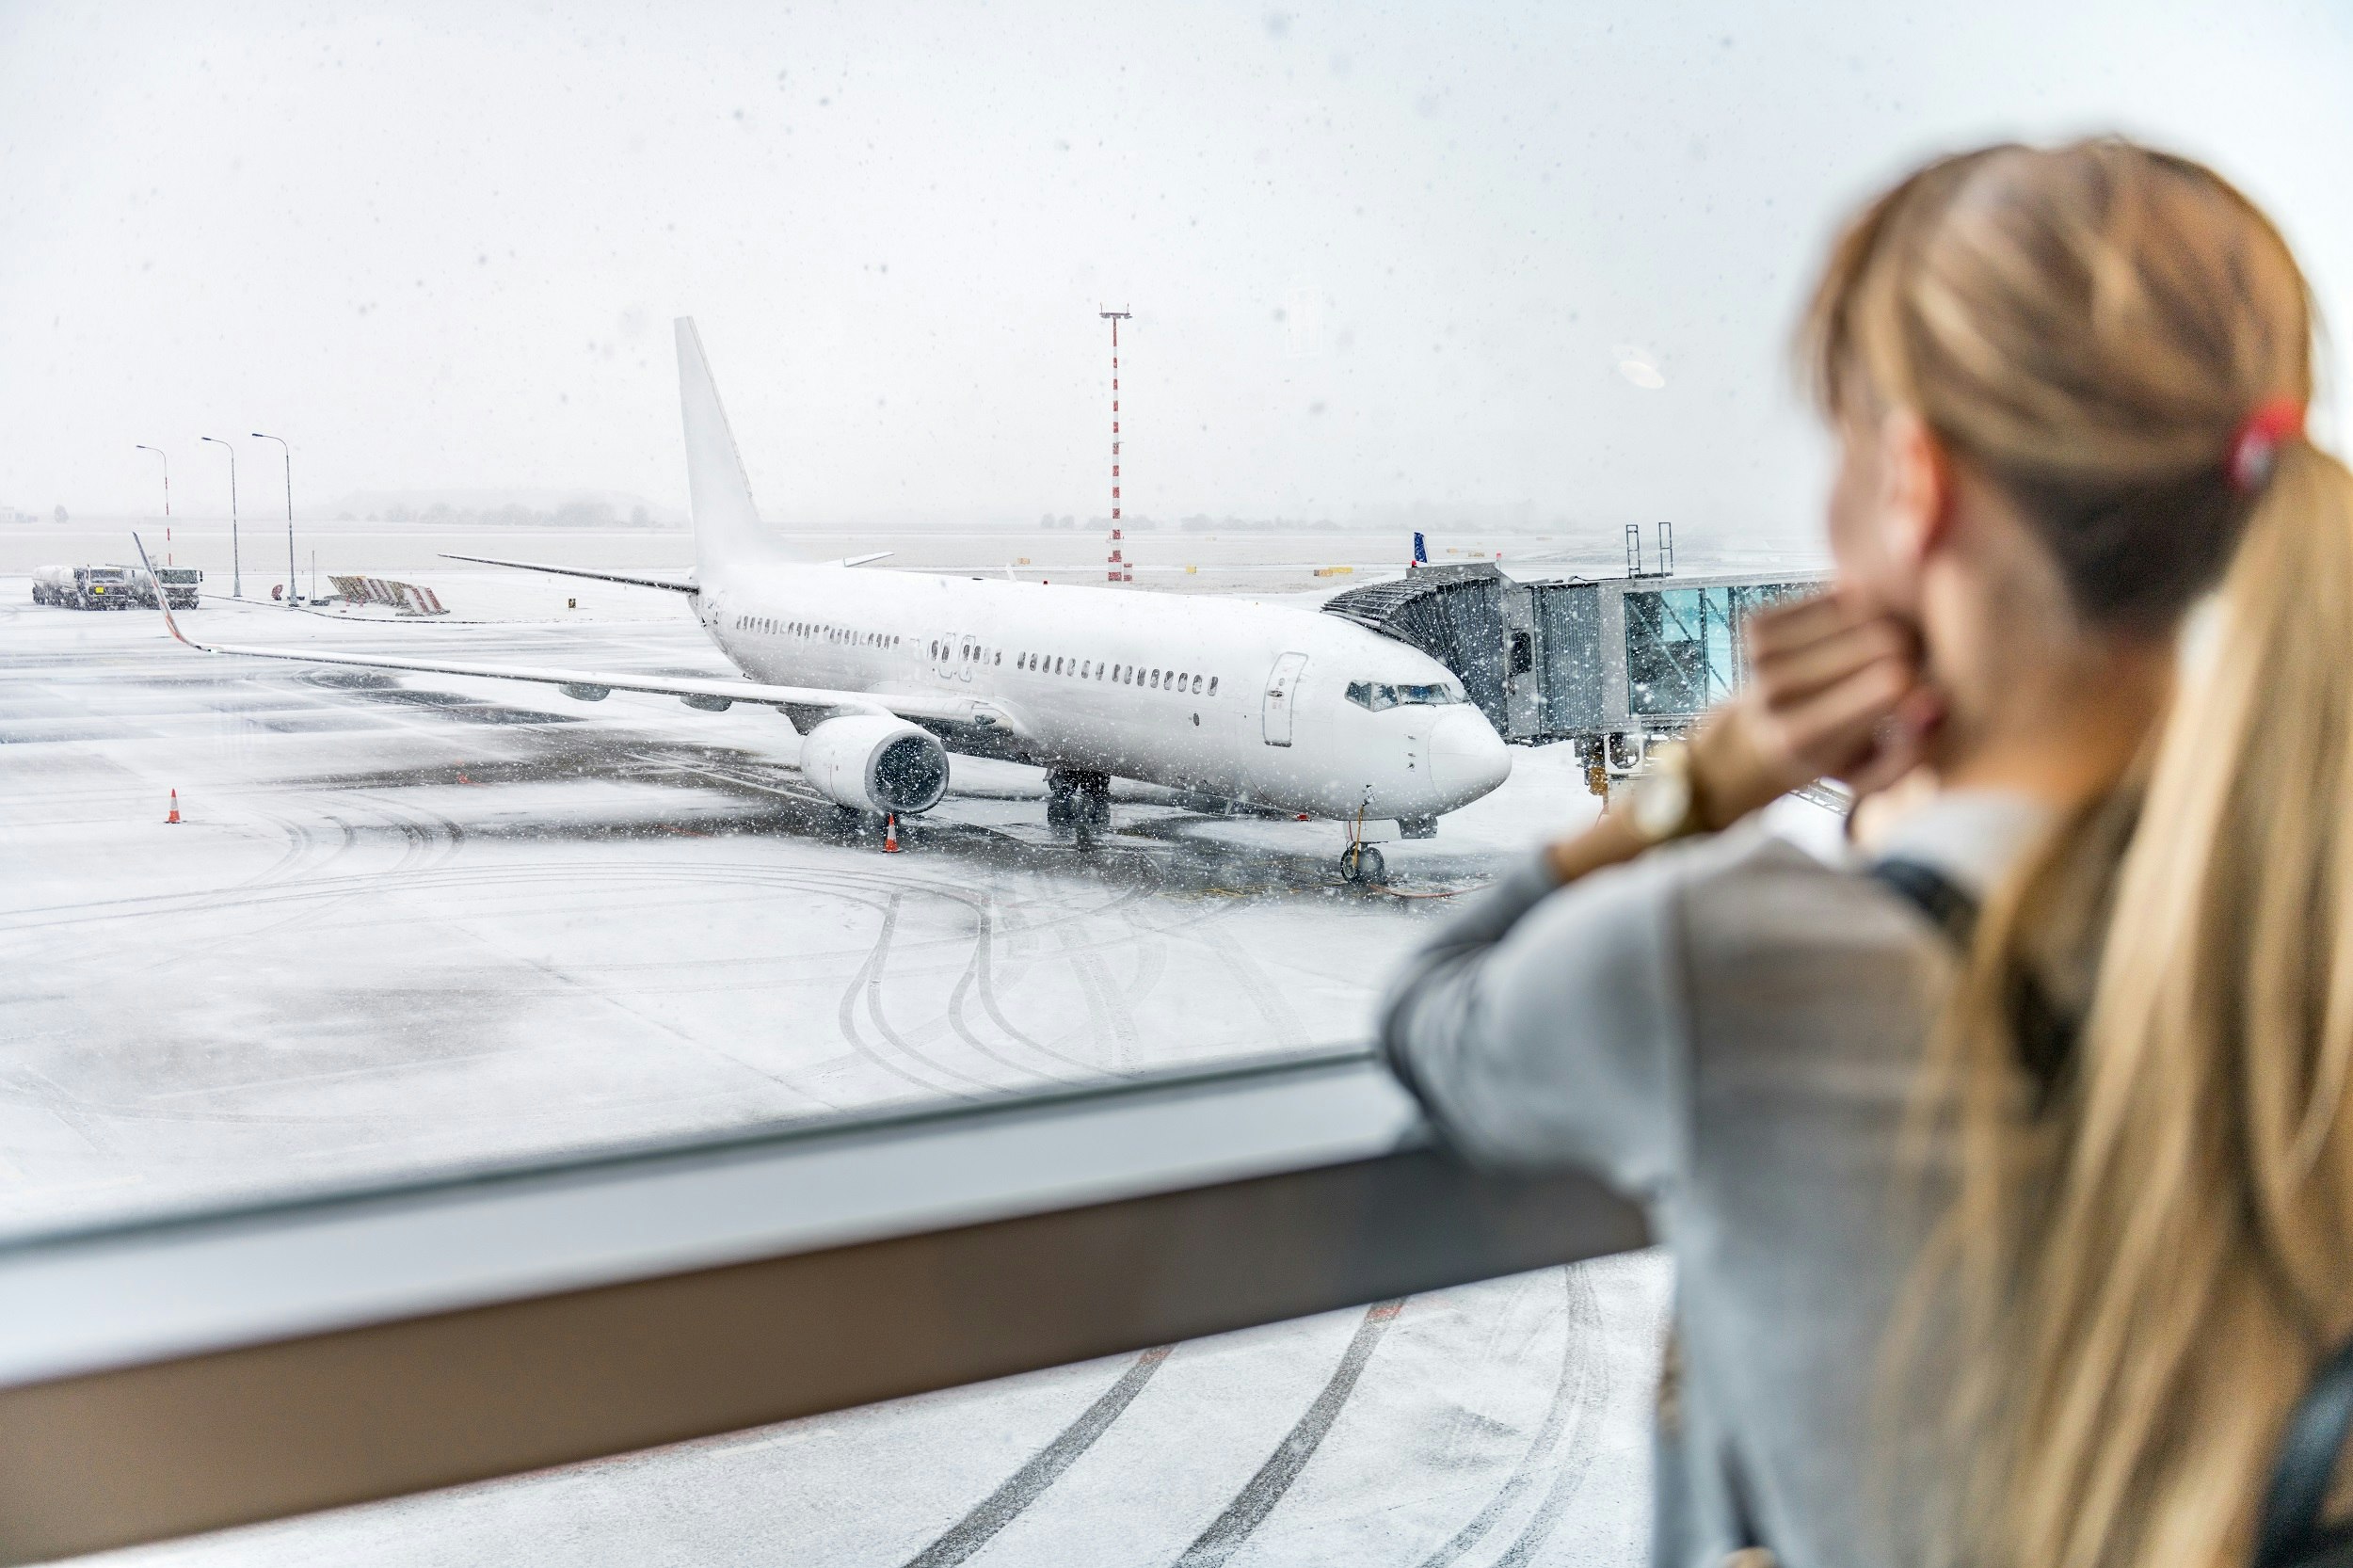 A woman gazes out of the window at a plane waiting at a stand in the snow